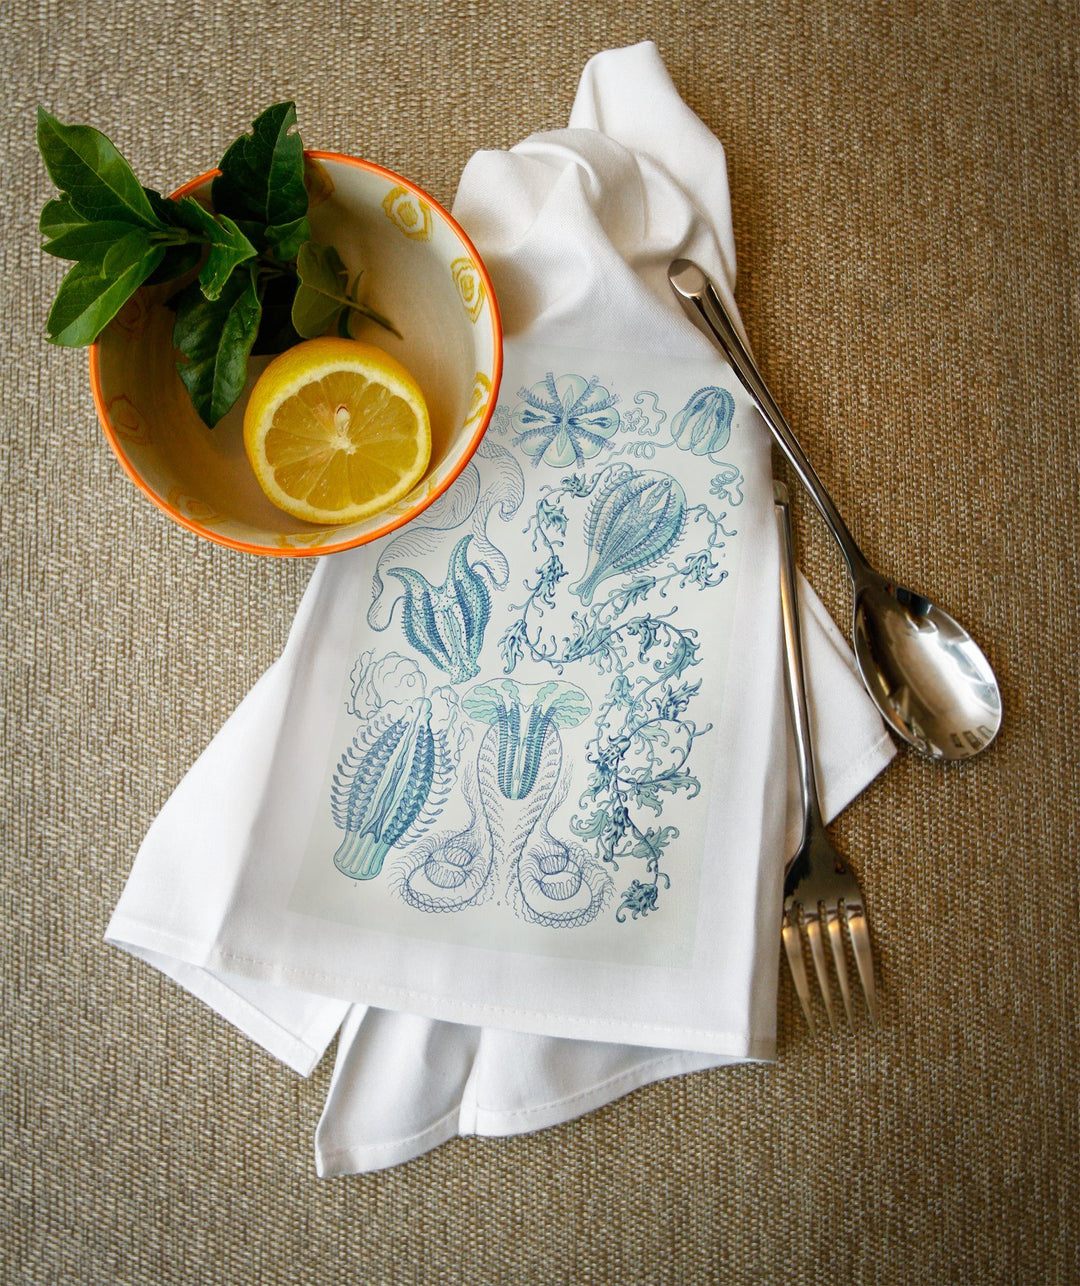 Art Forms of Nature, Ctenophorae, Ernst Haeckel Artwork, Towels and Aprons Kitchen Lantern Press 